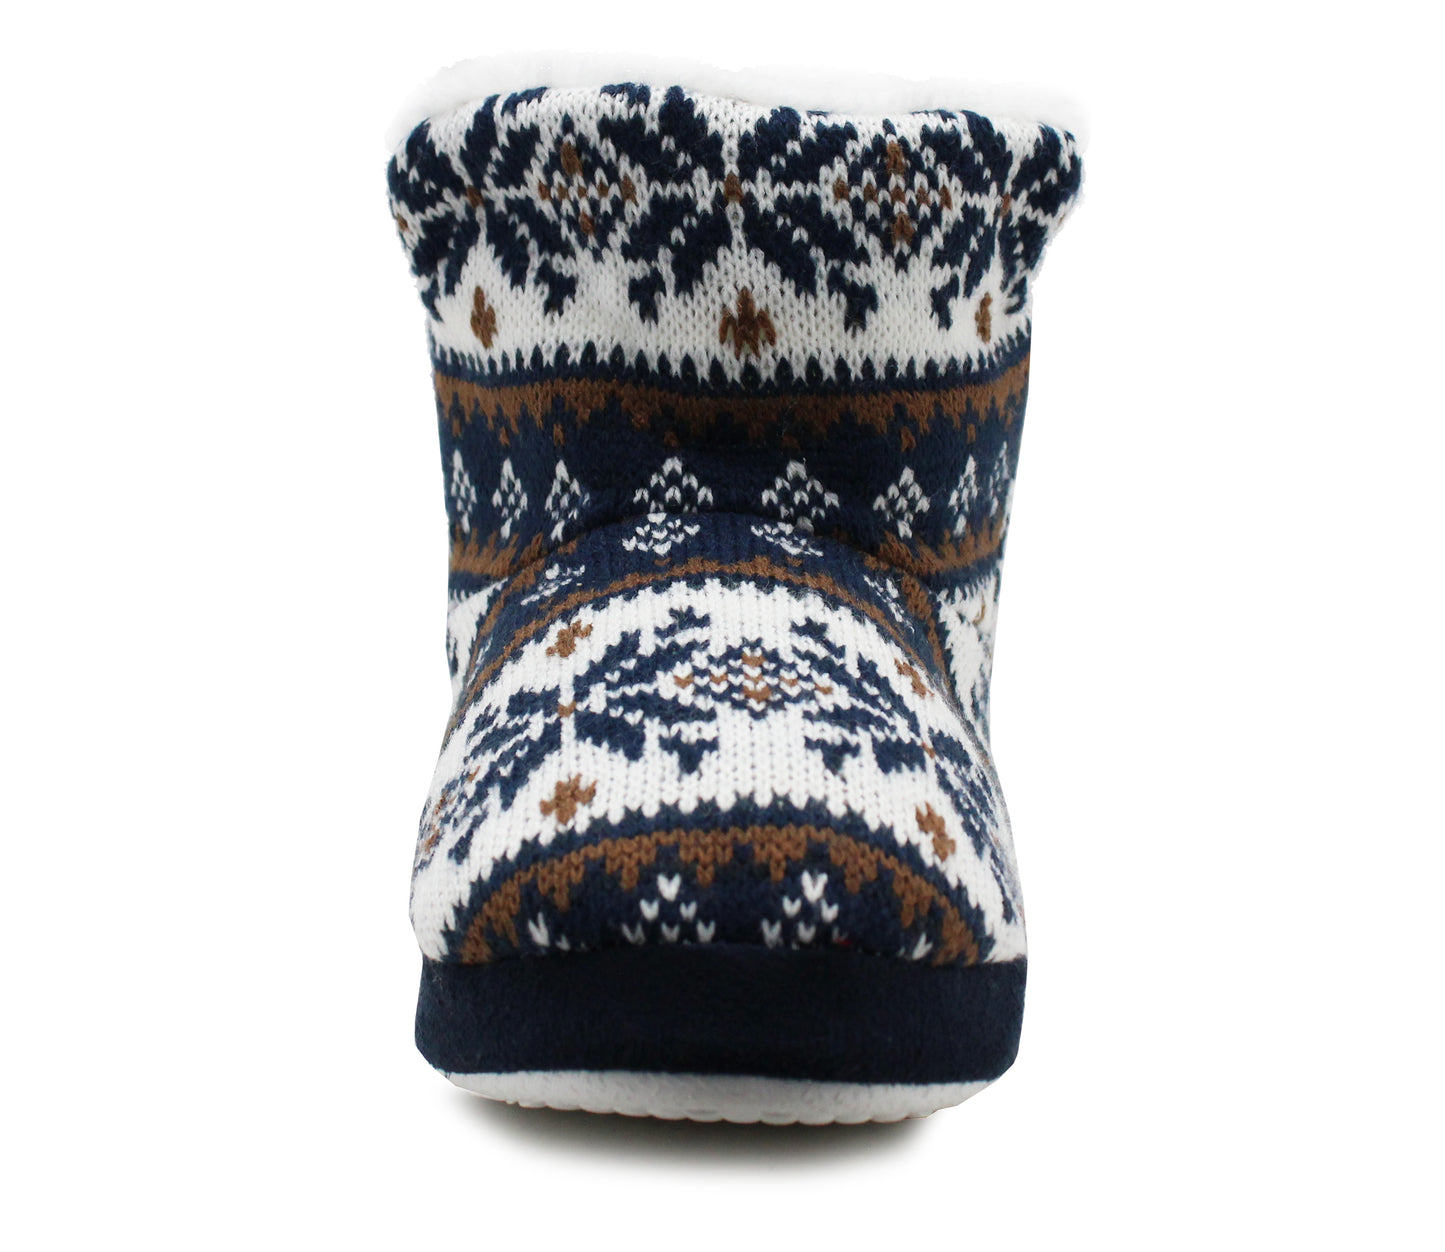 Womens Ankle Boot Slippers Knitted Navy Fair Isle Warm Faux Fur Lined Slip On Cosy Lightweight Snuggle Booties